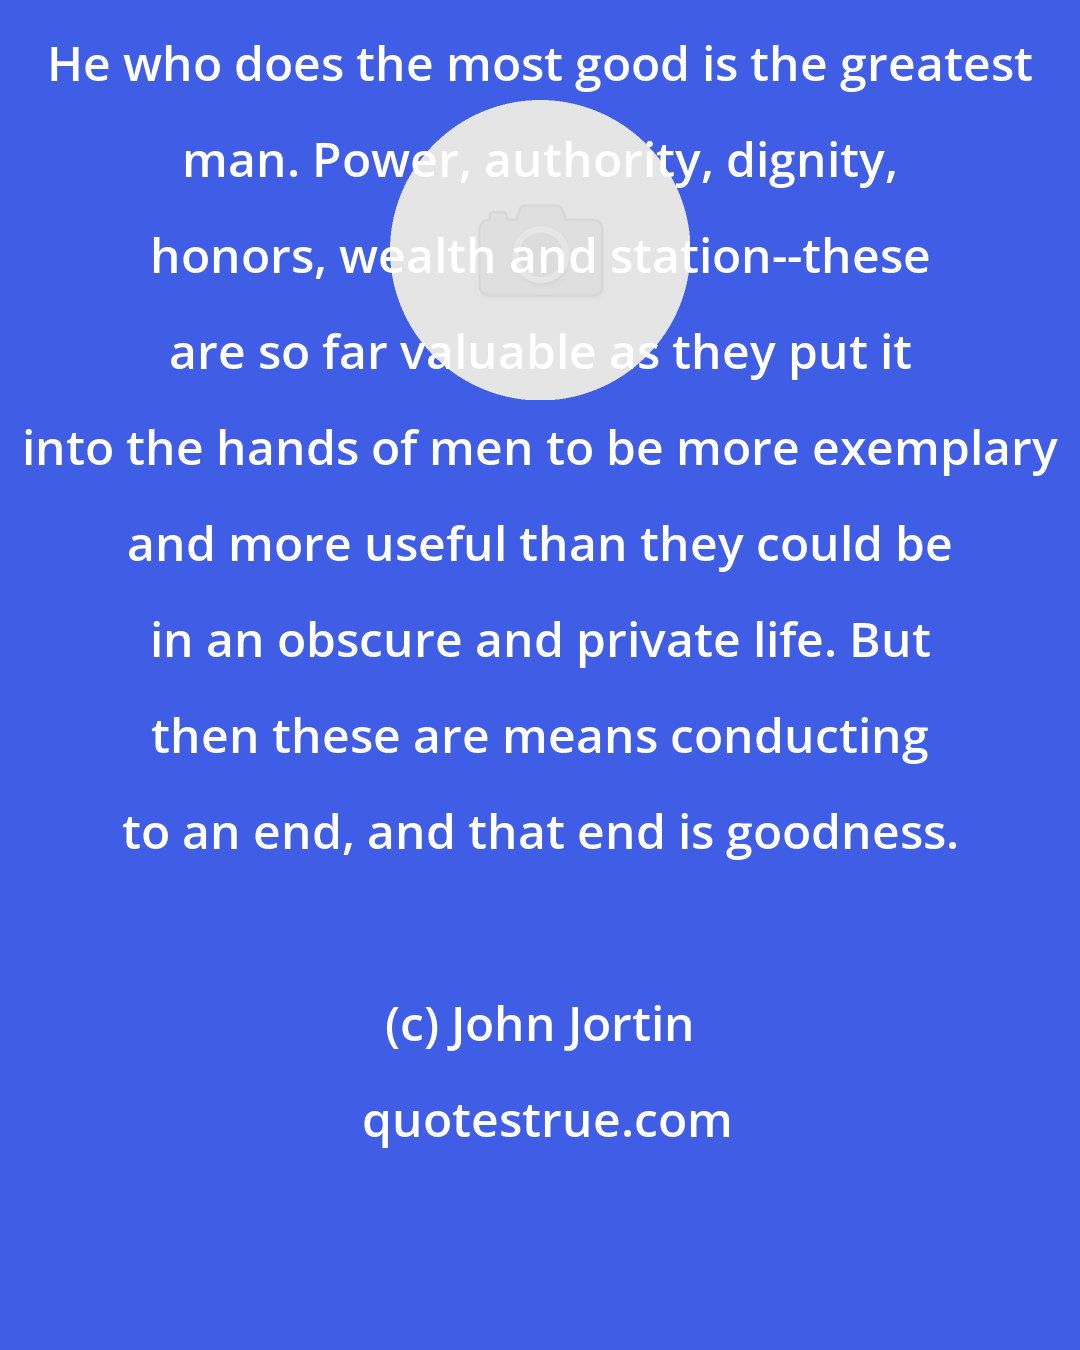 John Jortin: He who does the most good is the greatest man. Power, authority, dignity, honors, wealth and station--these are so far valuable as they put it into the hands of men to be more exemplary and more useful than they could be in an obscure and private life. But then these are means conducting to an end, and that end is goodness.